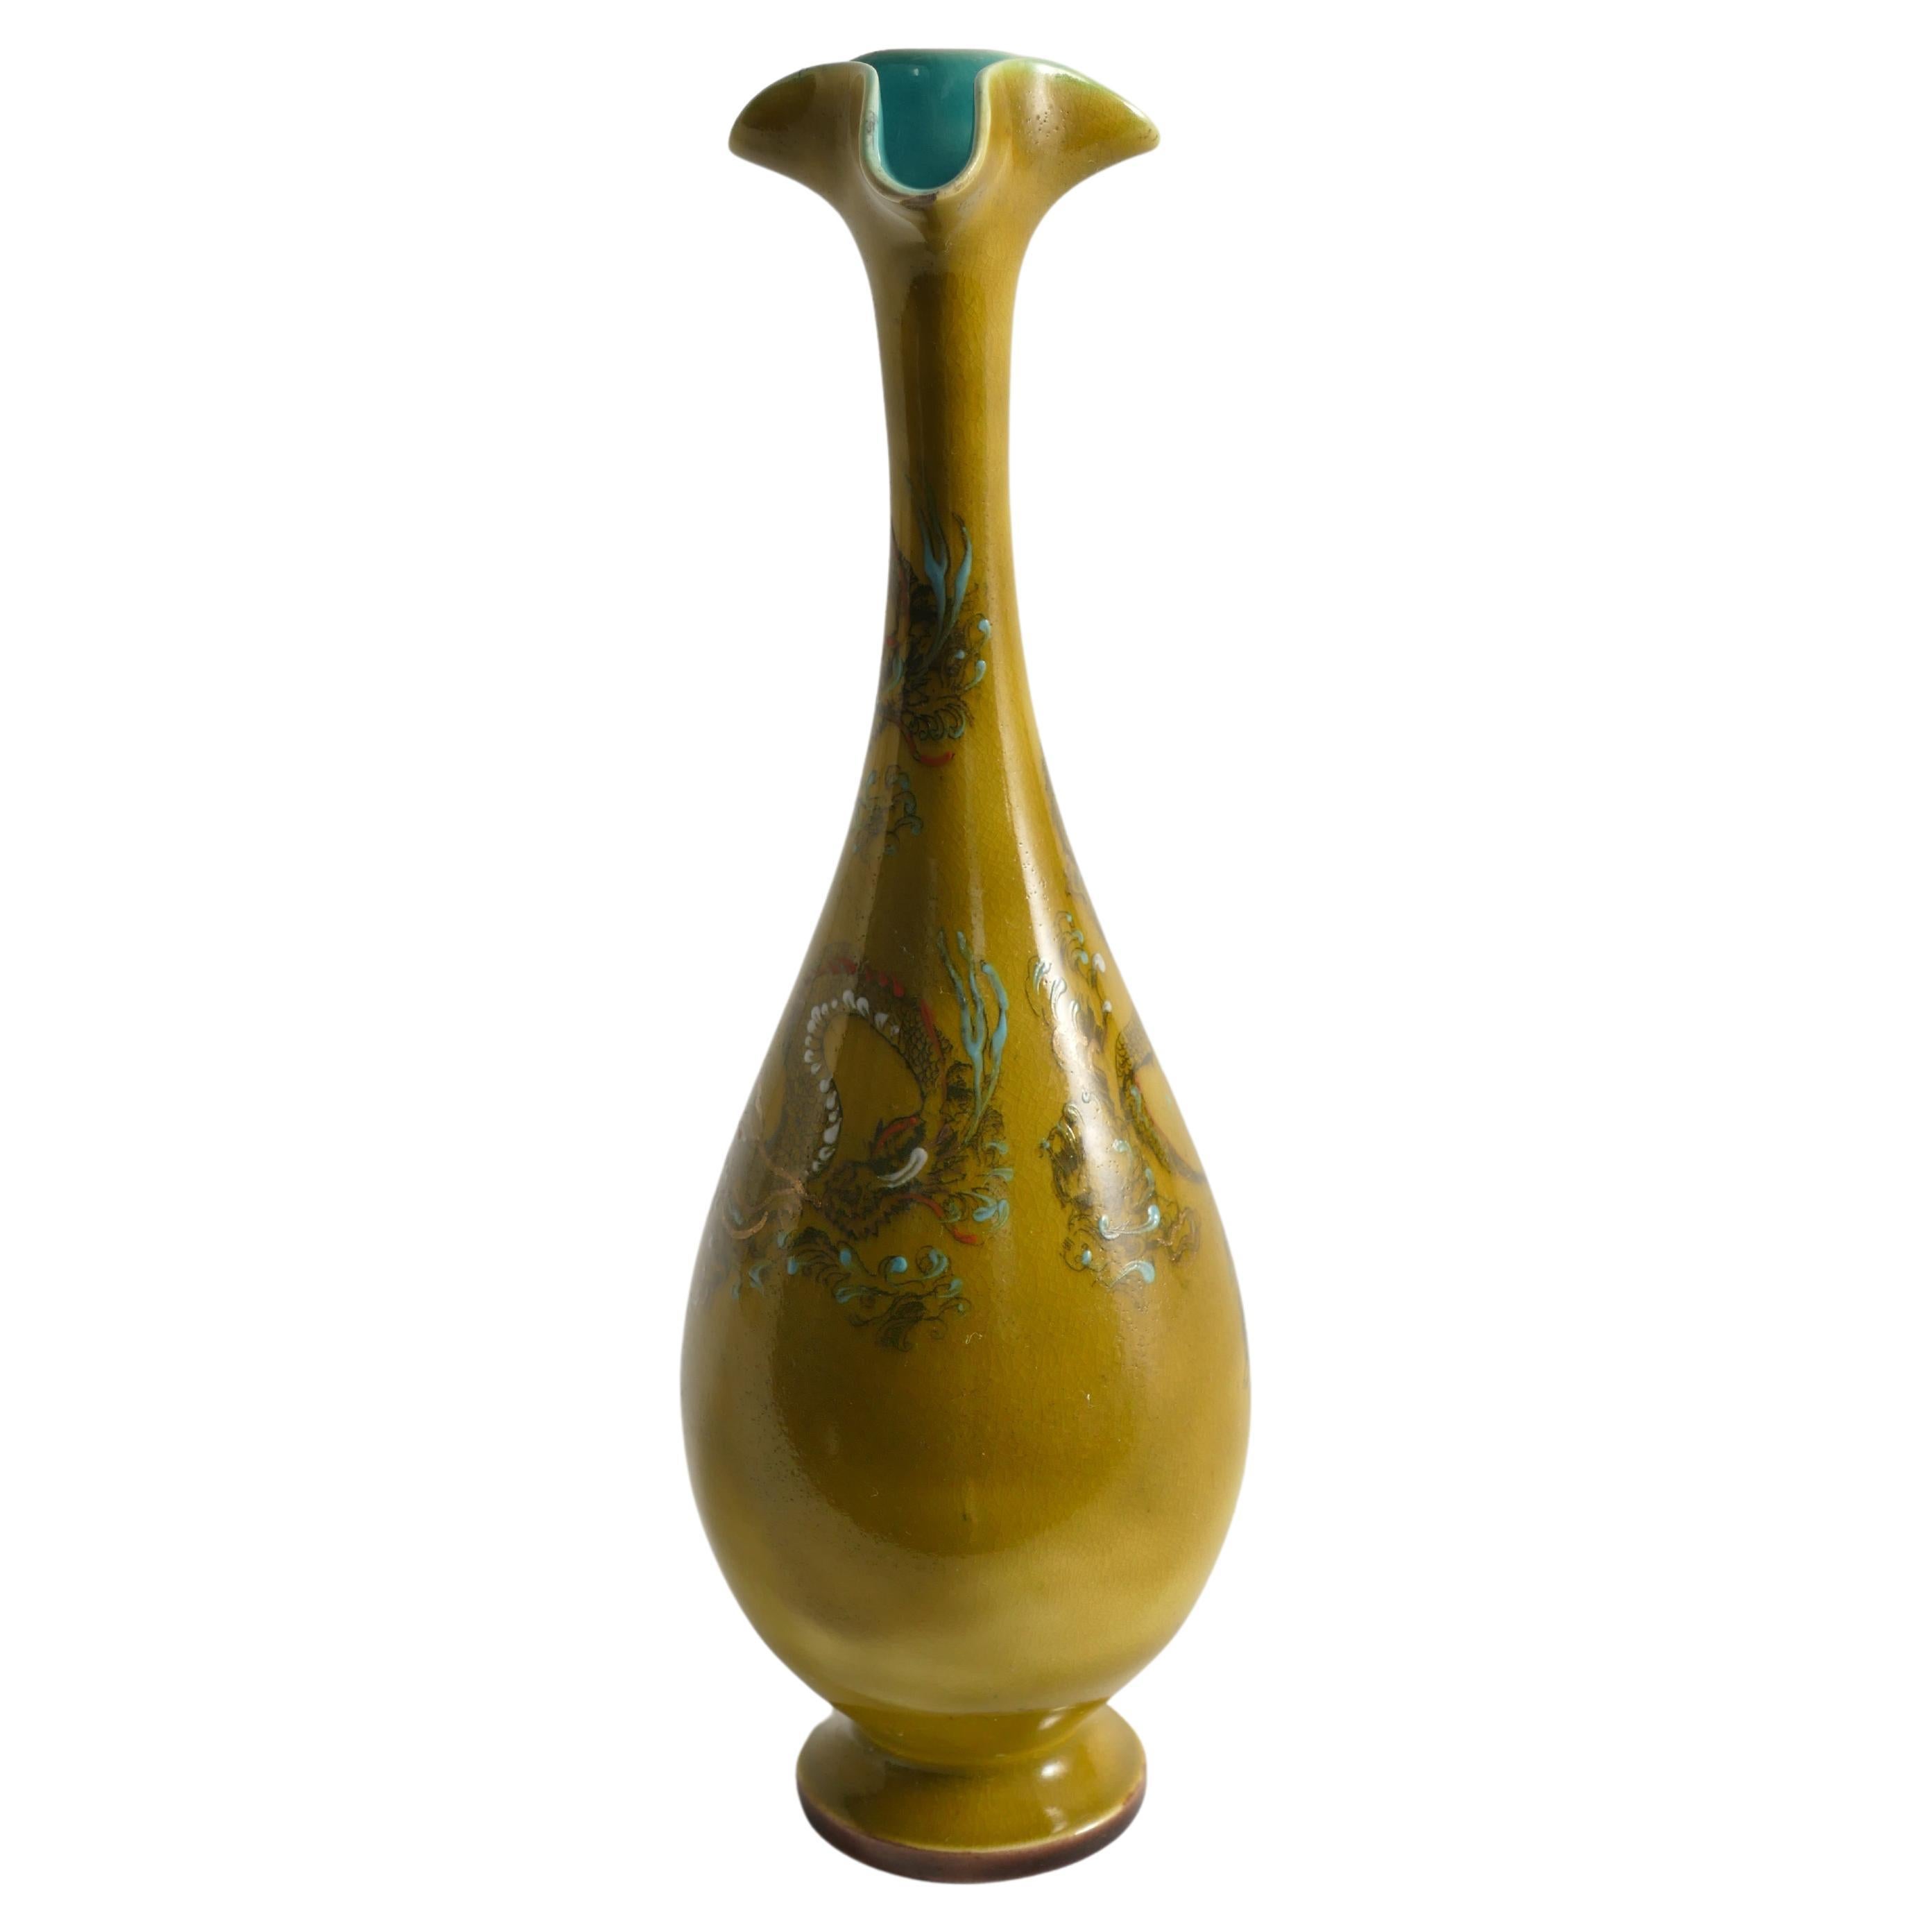 Chinoiserie Ochre Yellow Dragon Vase by Lambeth Doulton Faience, England 1880s For Sale